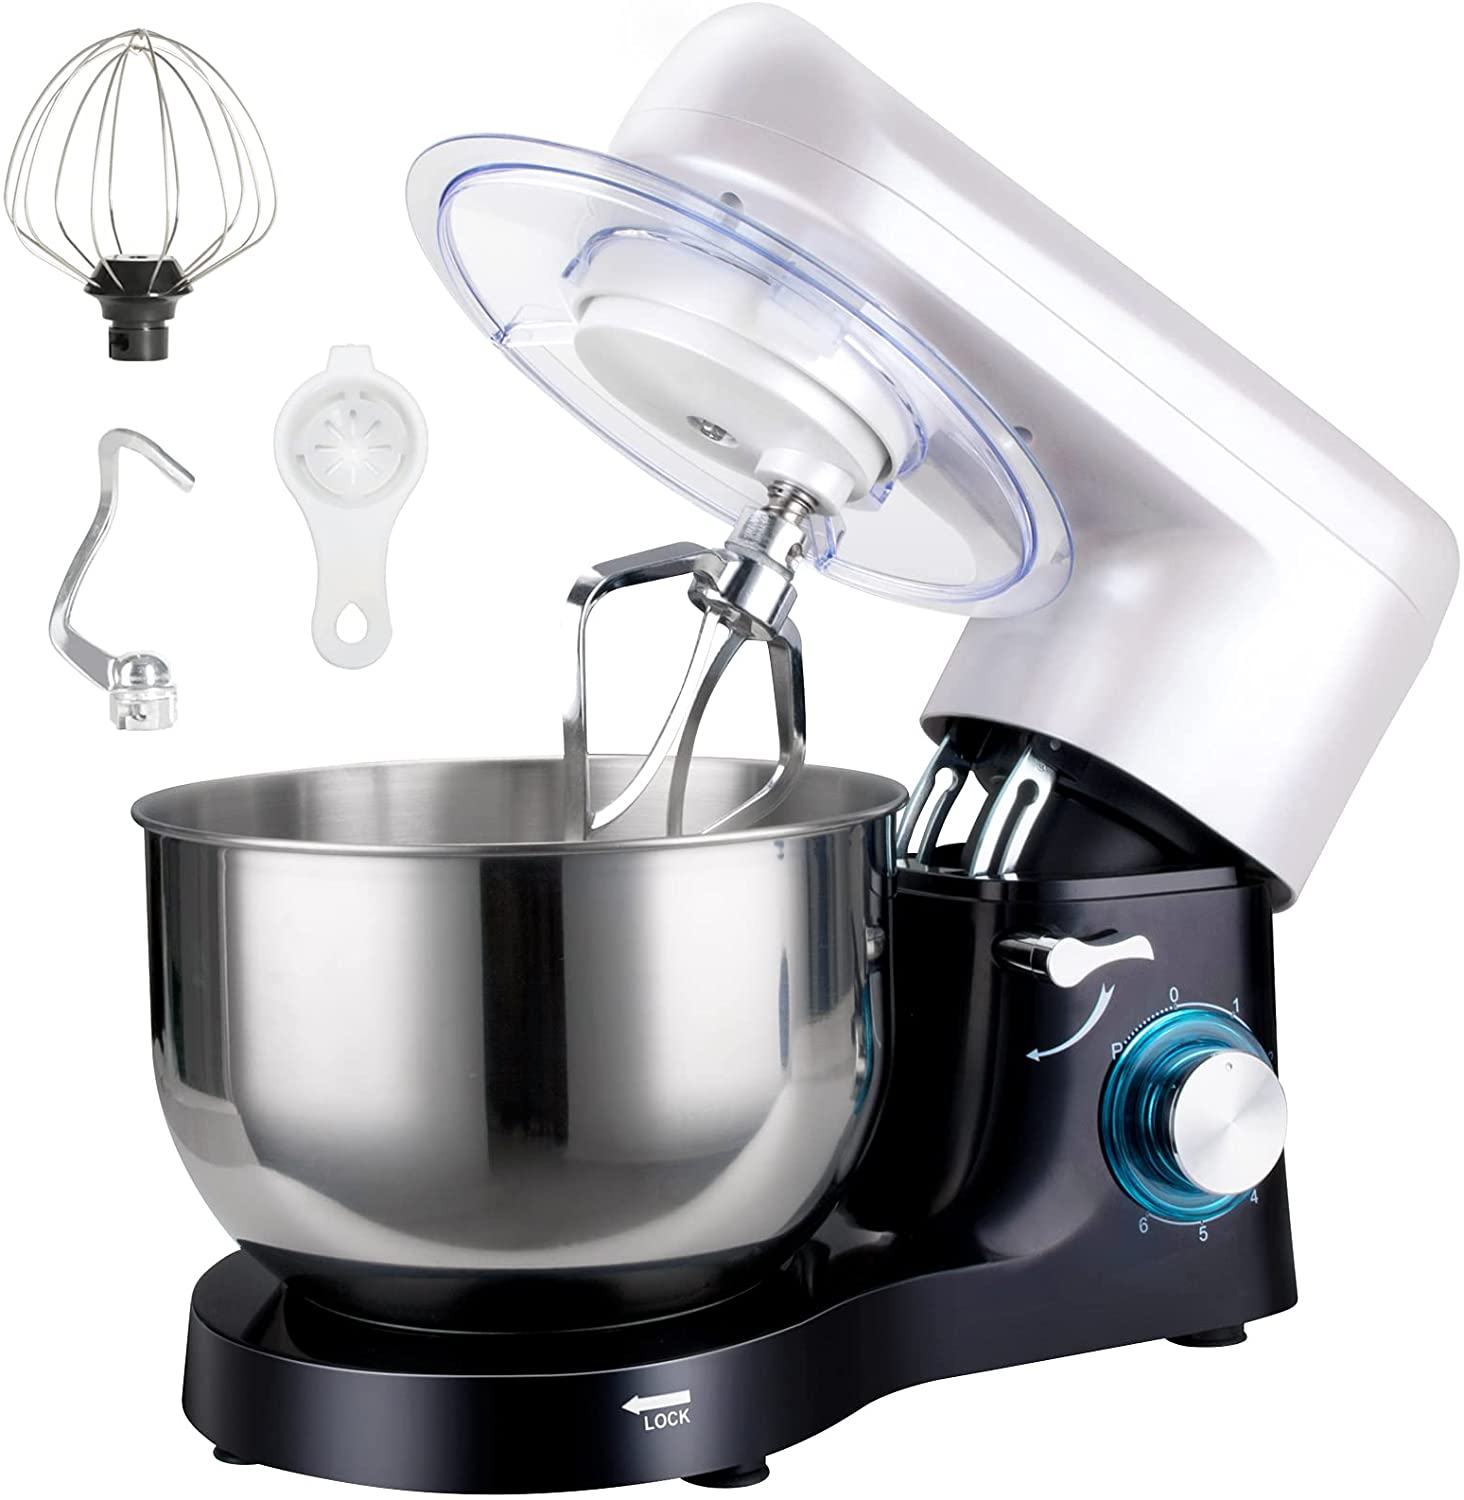 Dough Blender, Professional Stainless Steel Pastry Cutter Brytex 